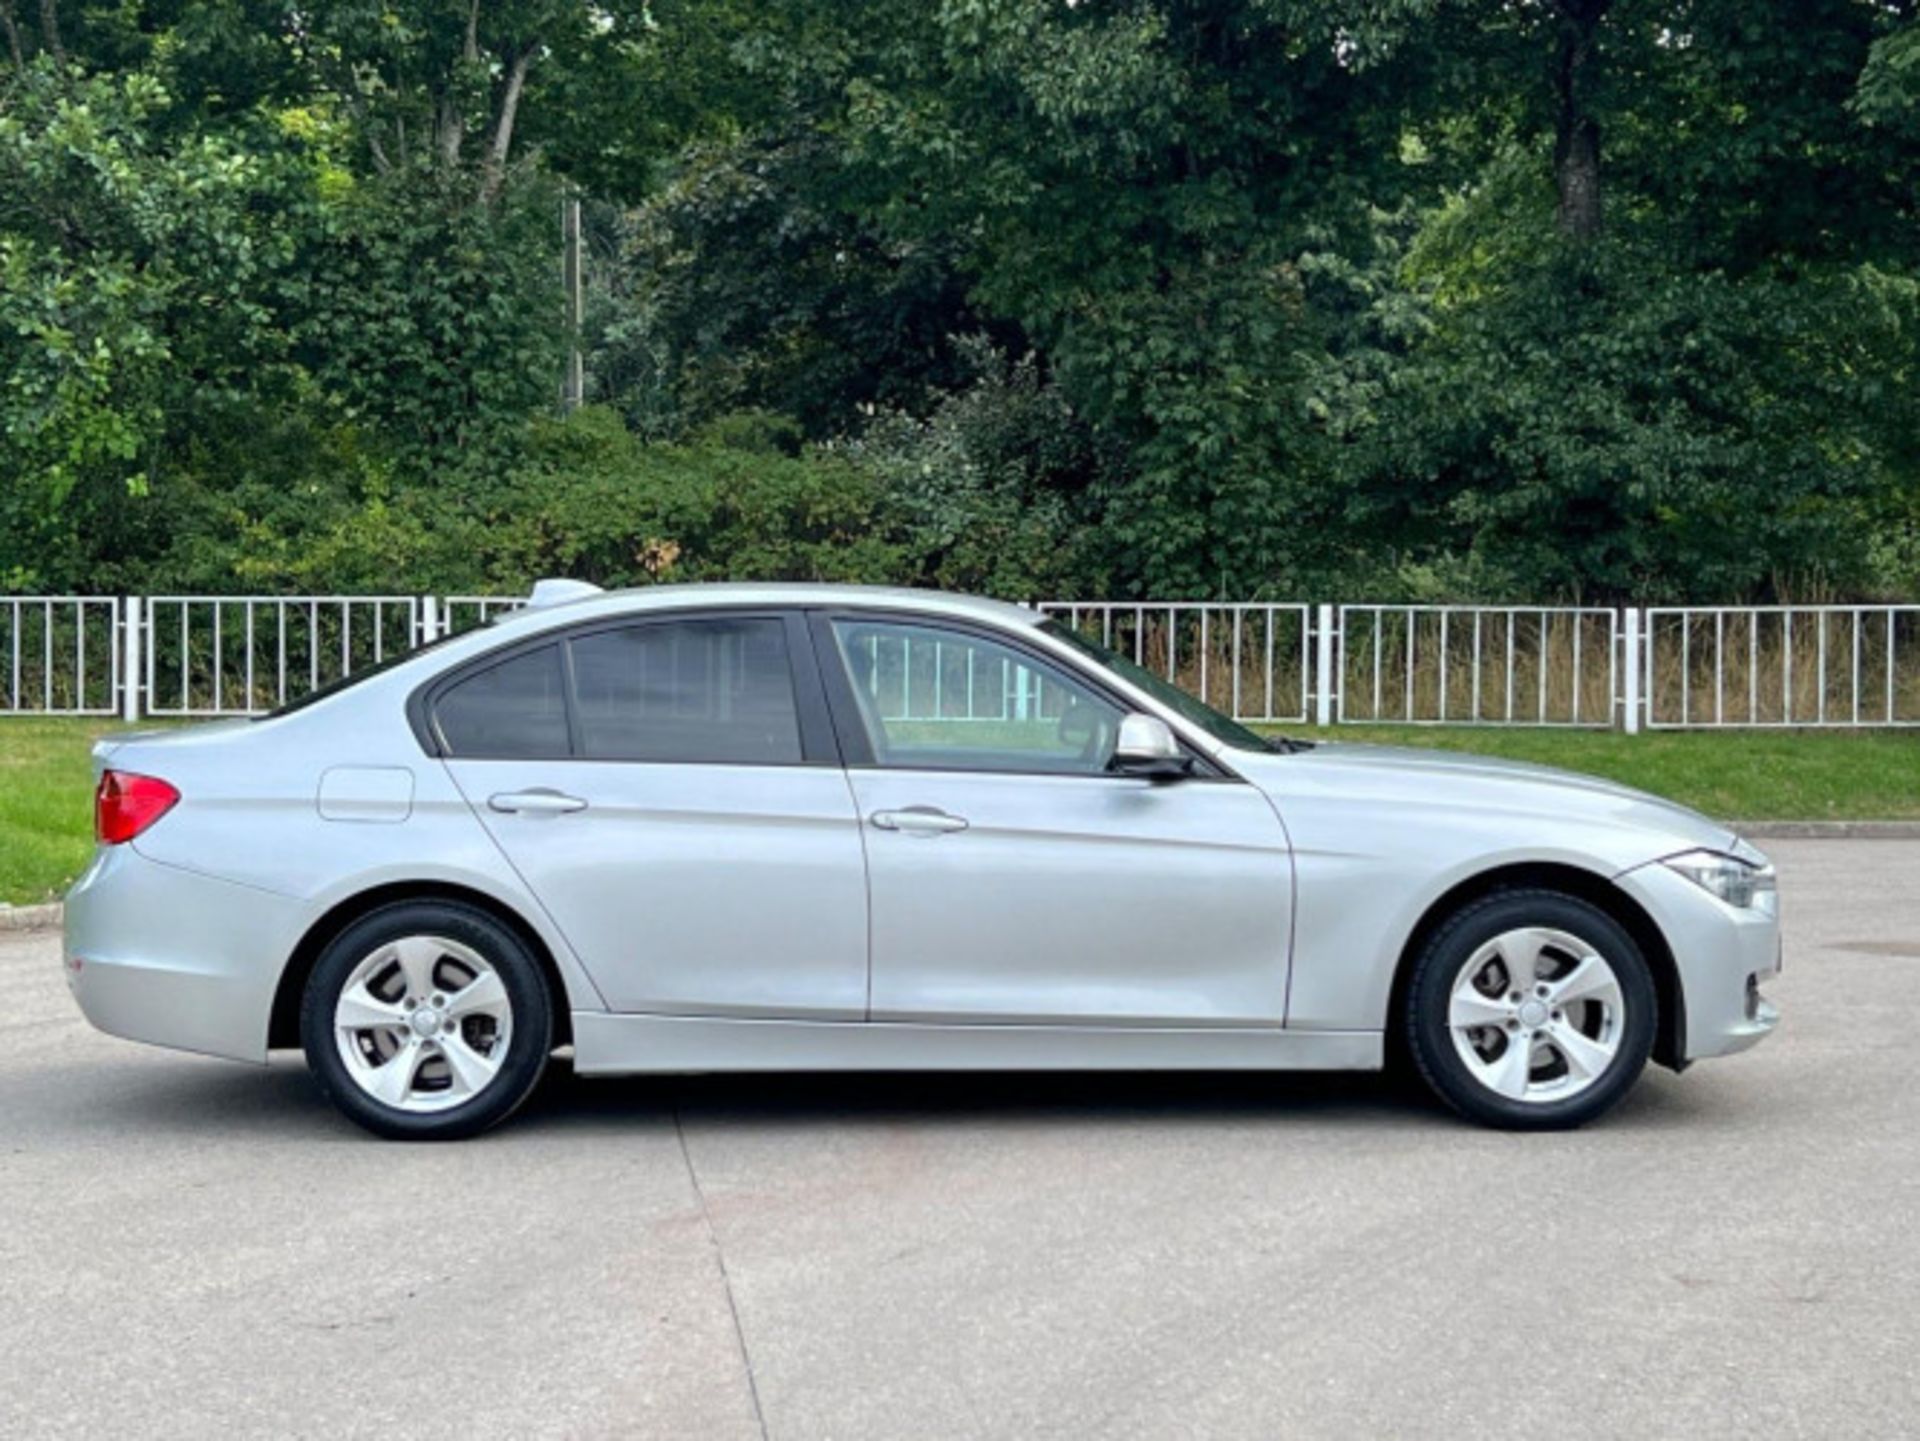 BMW 3 SERIES 2.0 DIESEL ED START STOP - A WELL-MAINTAINED GEM >>--NO VAT ON HAMMER--<< - Image 2 of 229